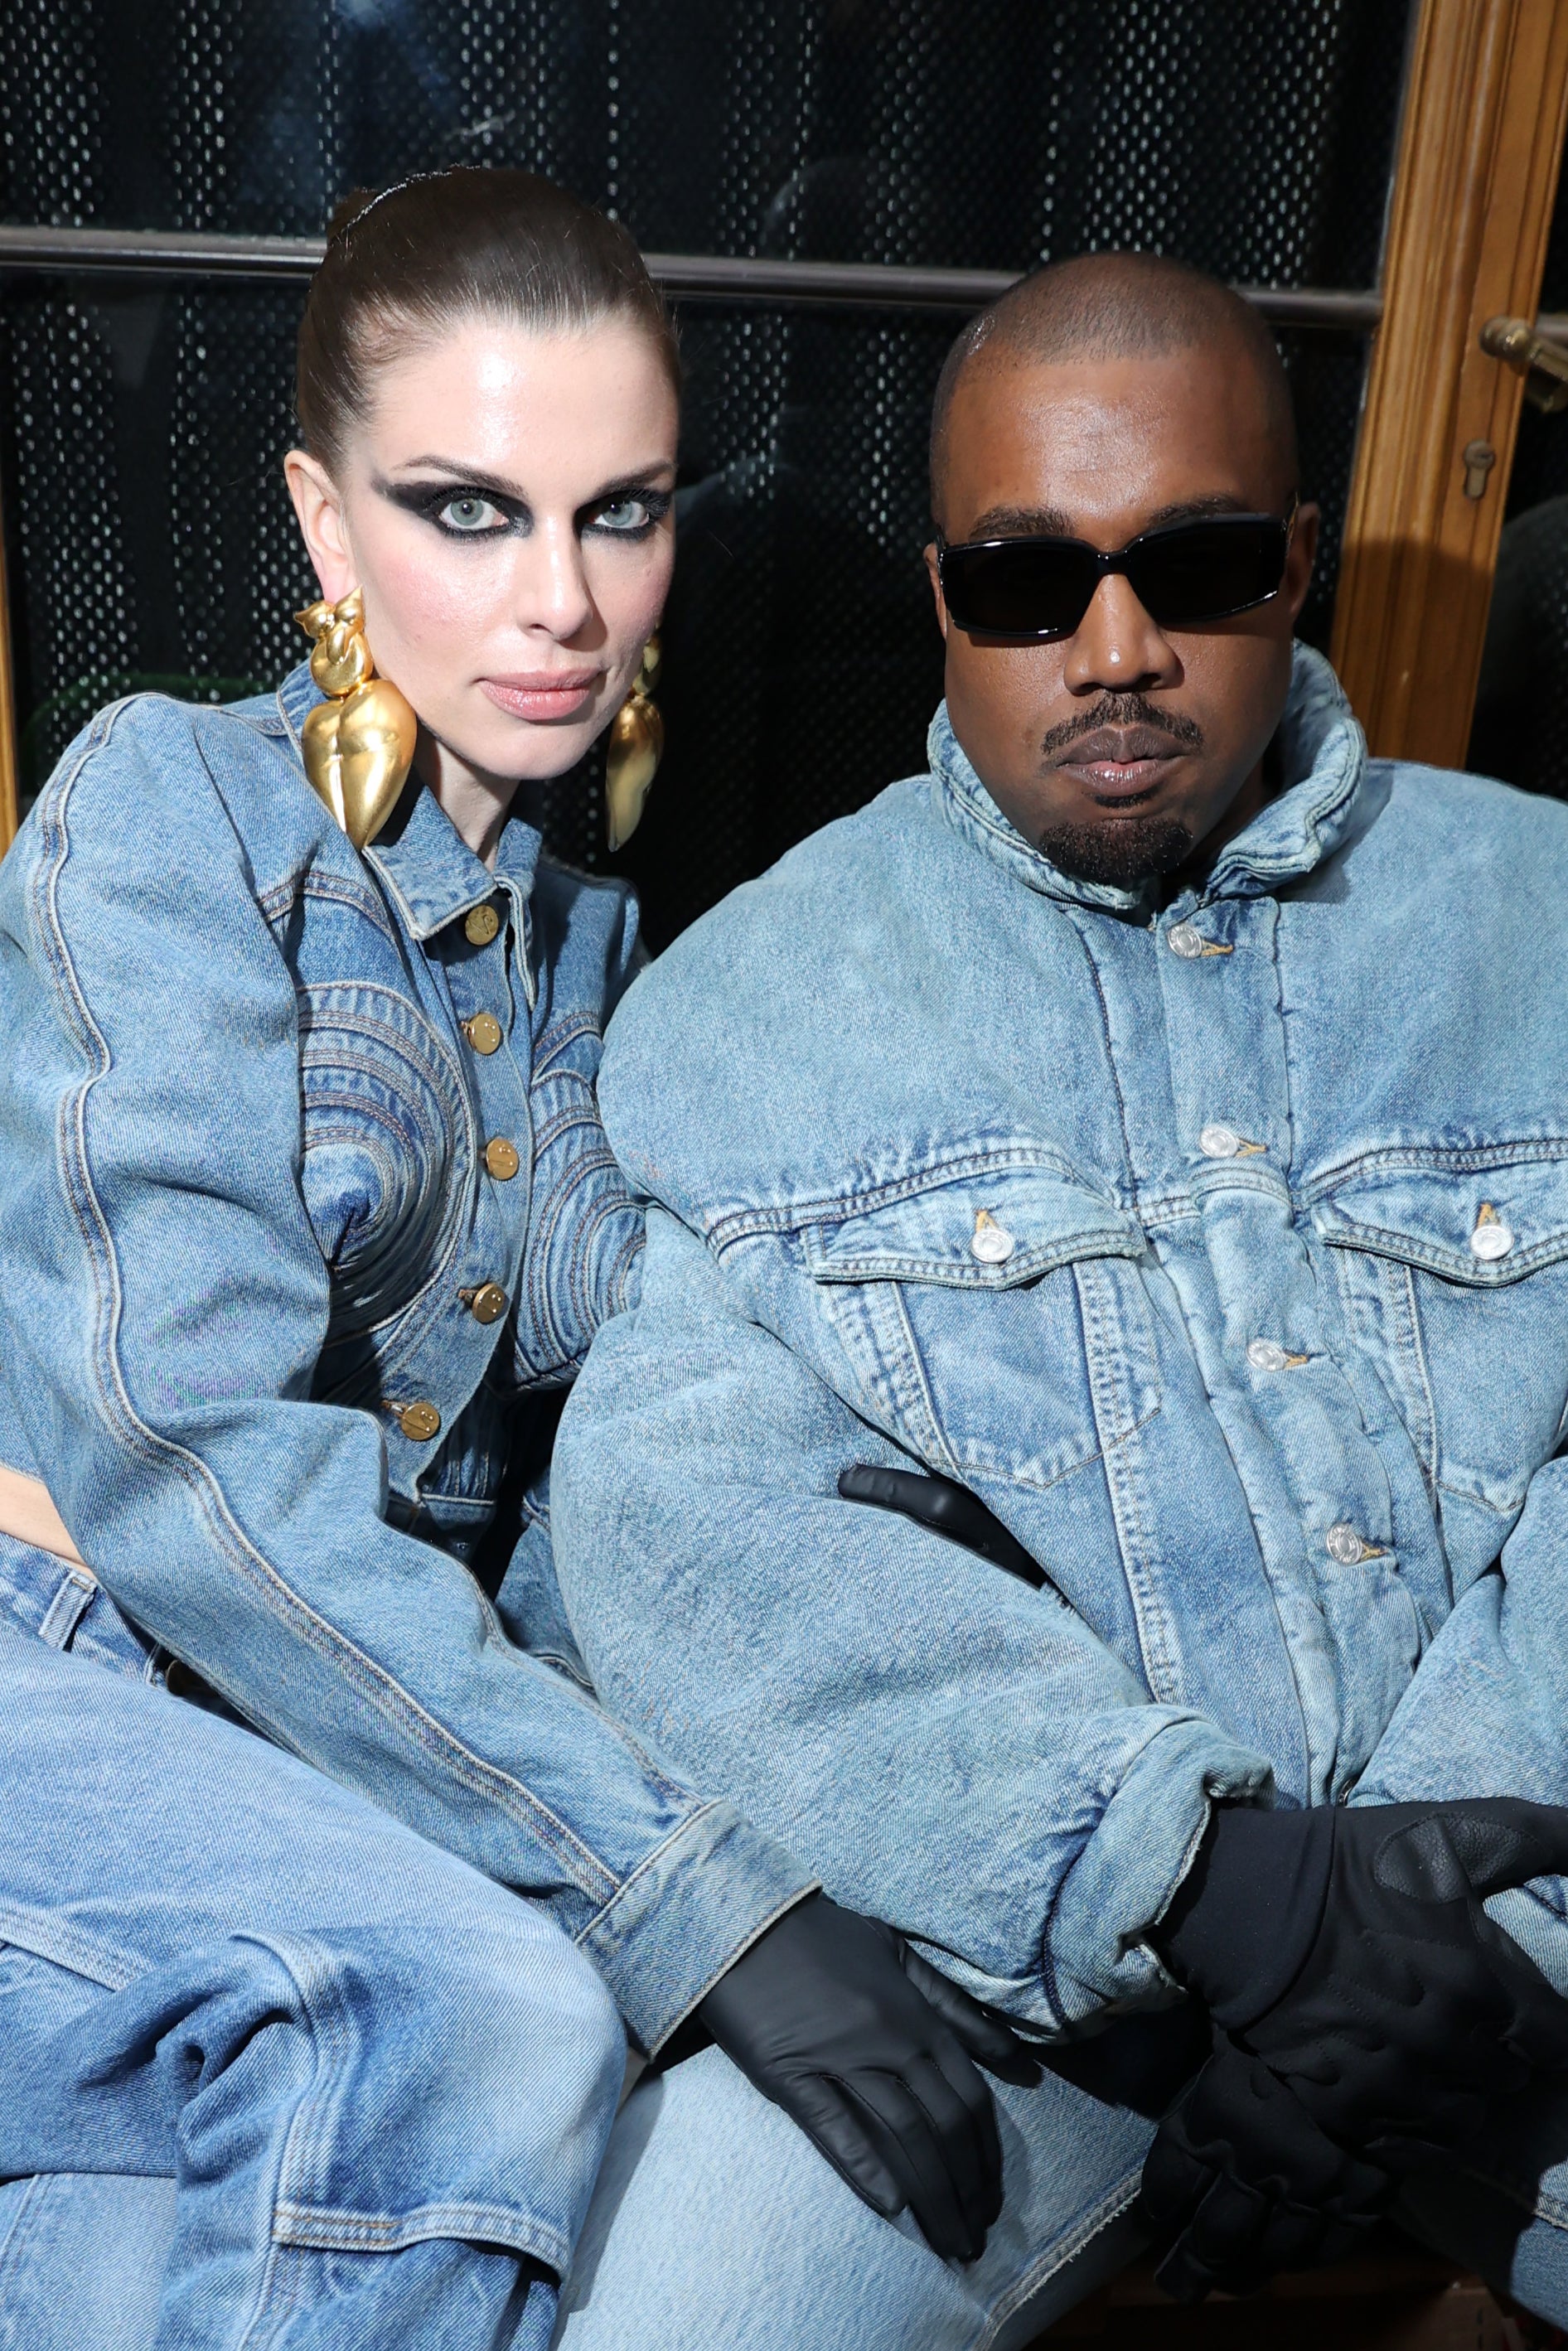 Public affair: Fox and Kanye West attend a Paris fashion show in early 2022